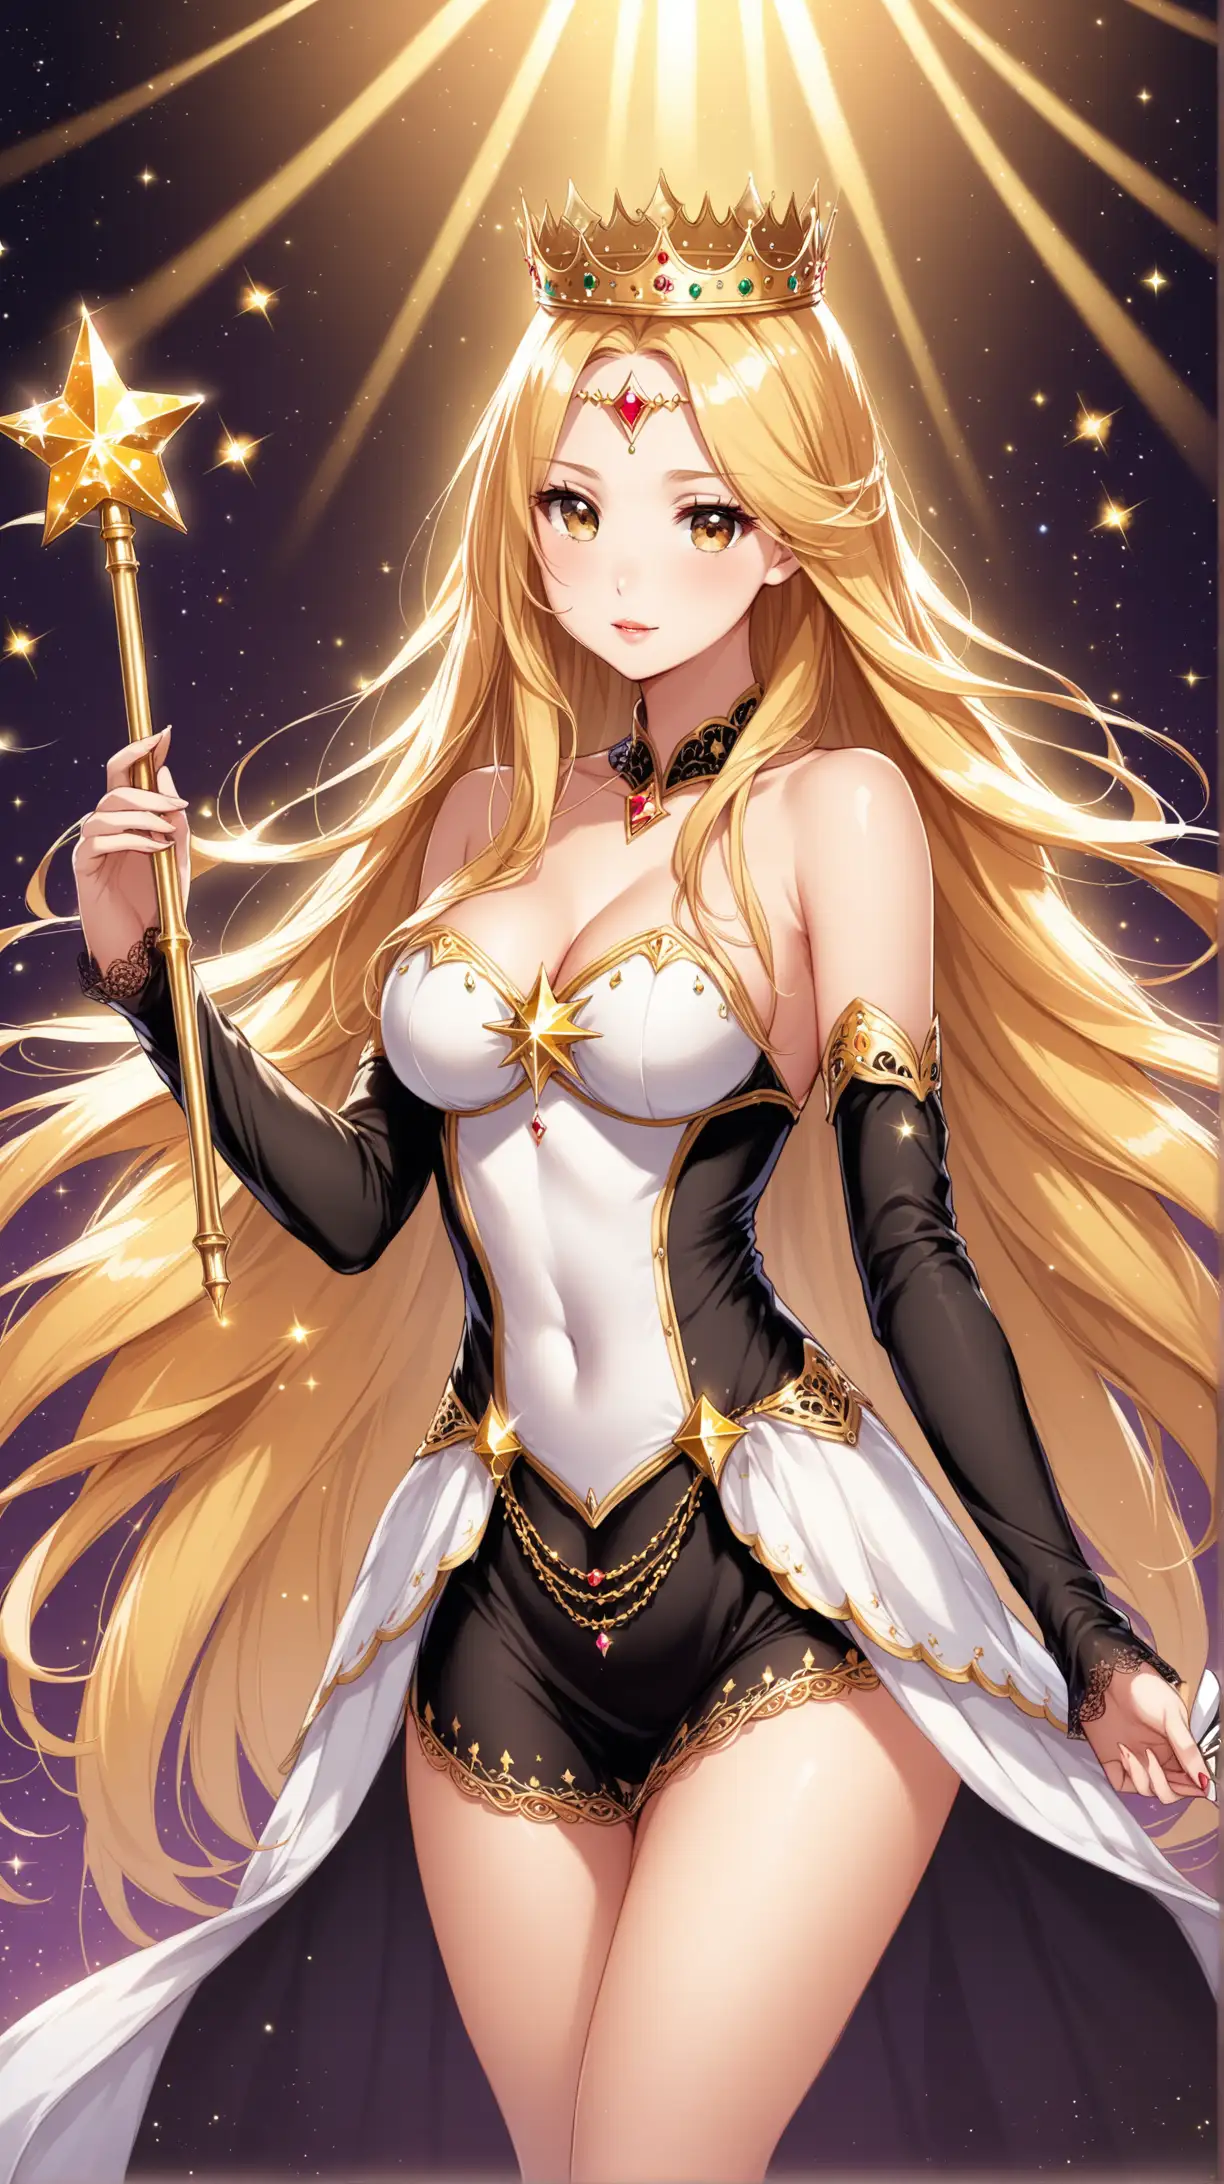 Sexy women wear a queen crown and carry wand, angel costume, playful, blond long hair,light brown eye, black short sexy dress, fantastic background .